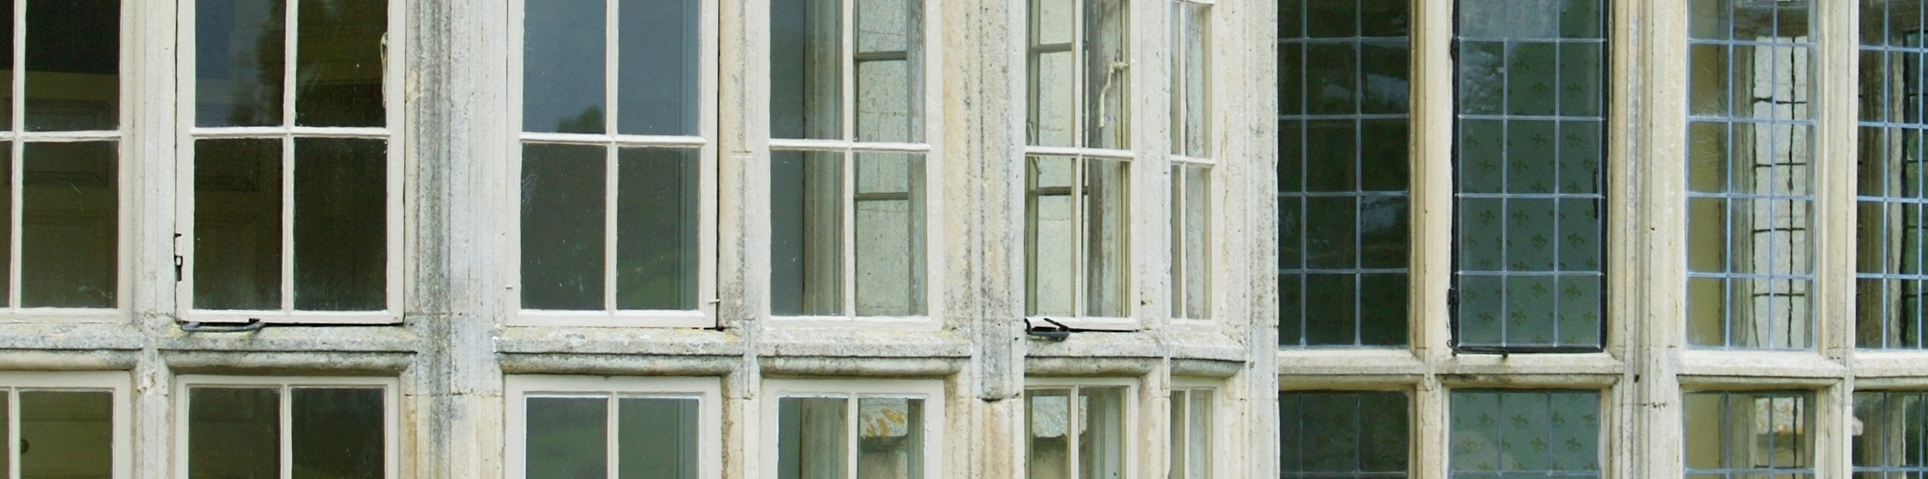 Window frames in a historic building decorated using lead paint.